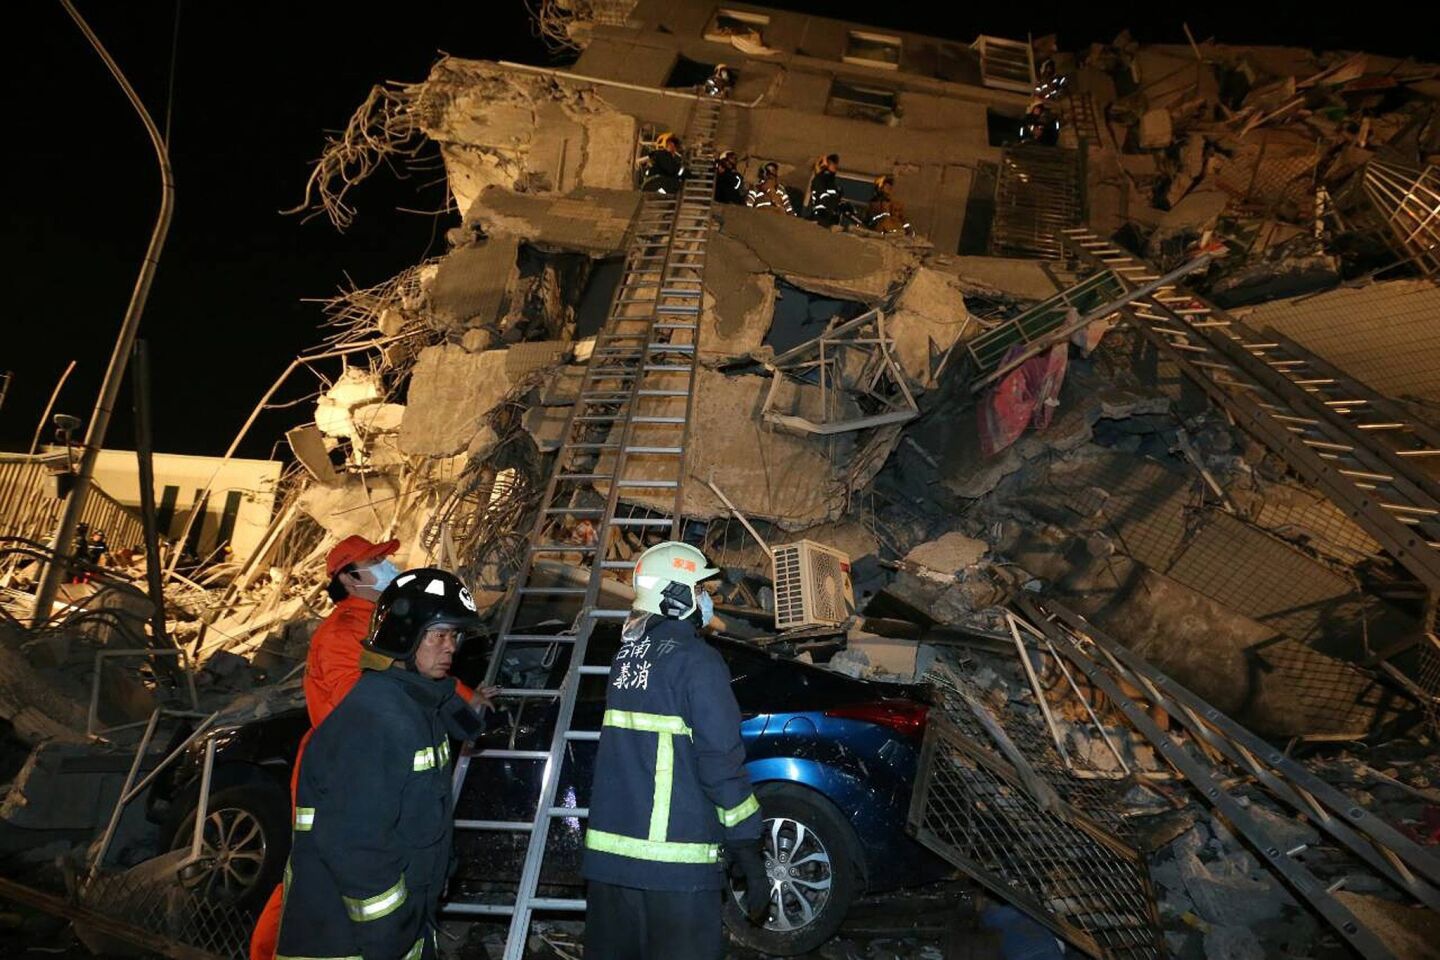 Rescue personnel search through debris at the site of a collapsed building in the southern Taiwanese city of Tainan following a 6.4 magnitude quake early Feb. 6.